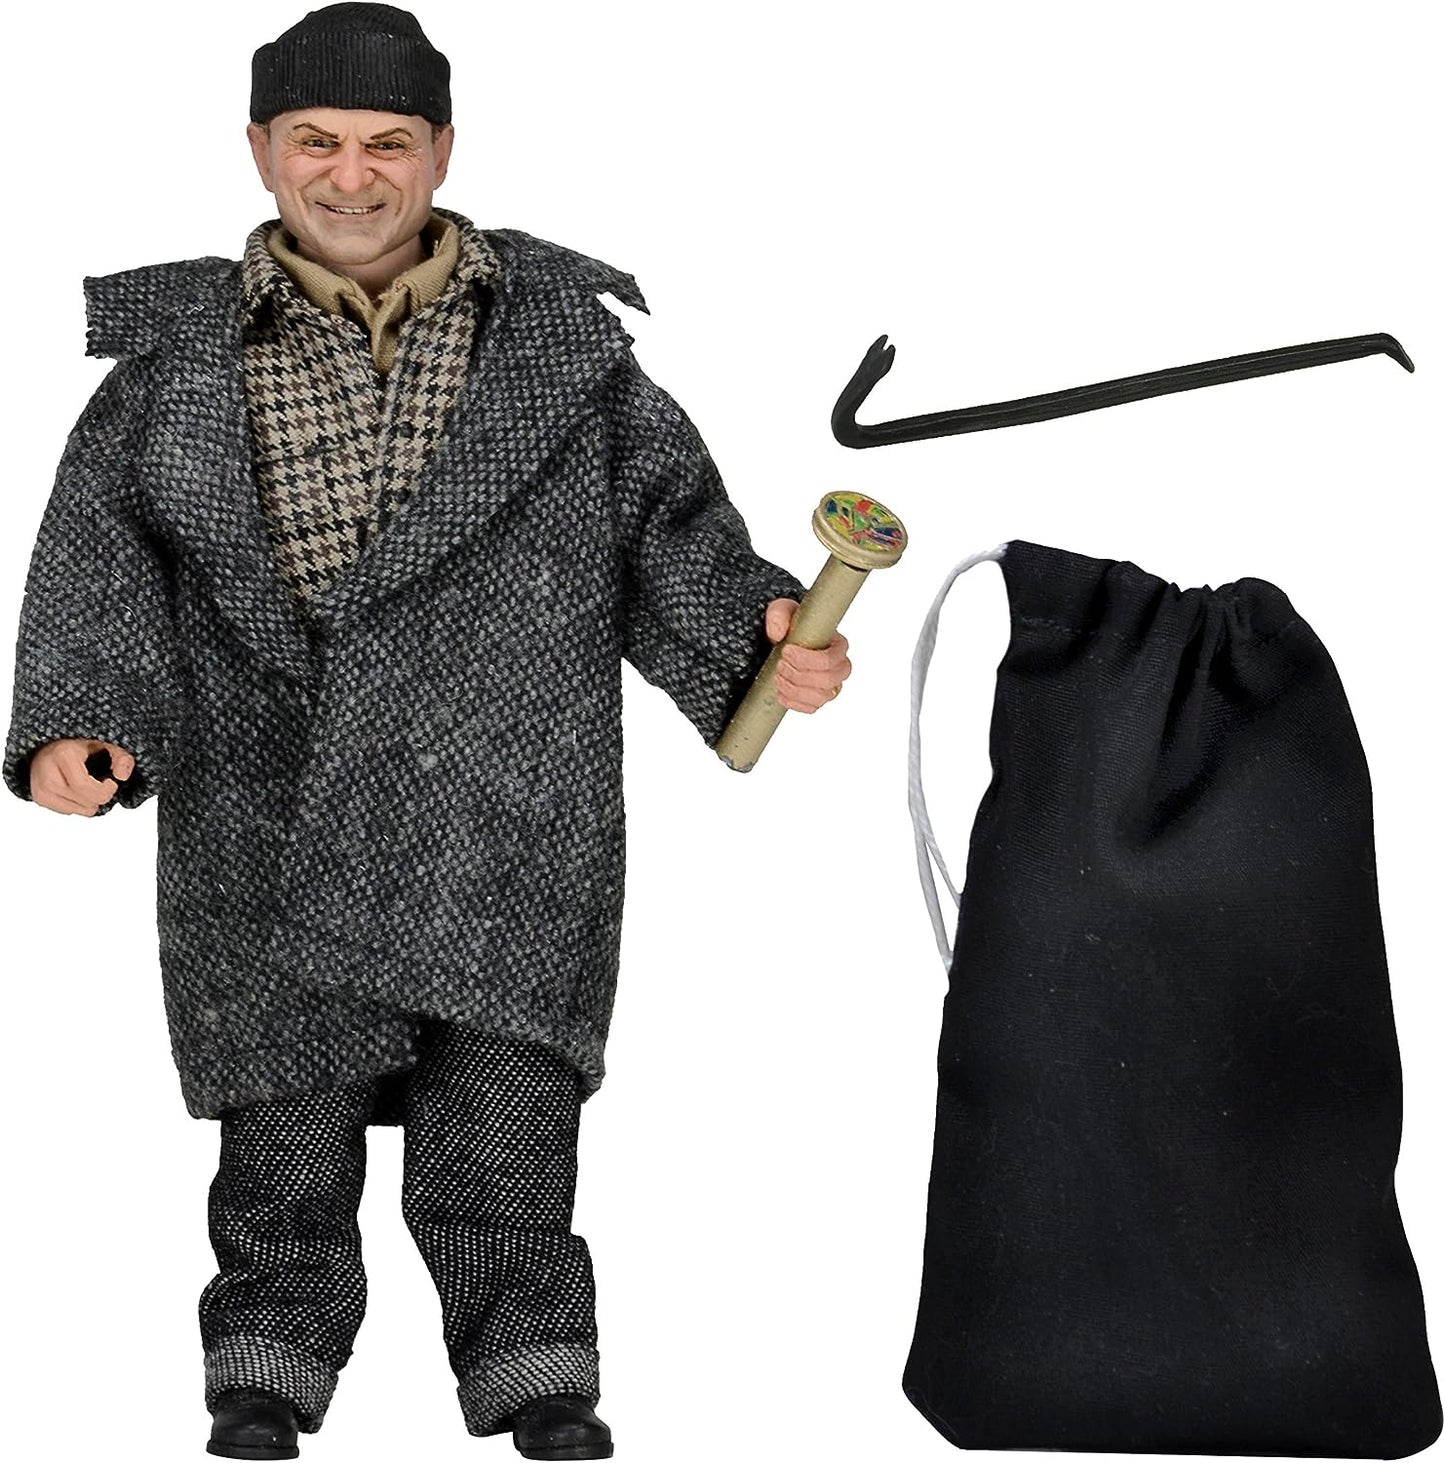 NECA Home Alone 25th Anniversary Harry Lime Clothed Figure